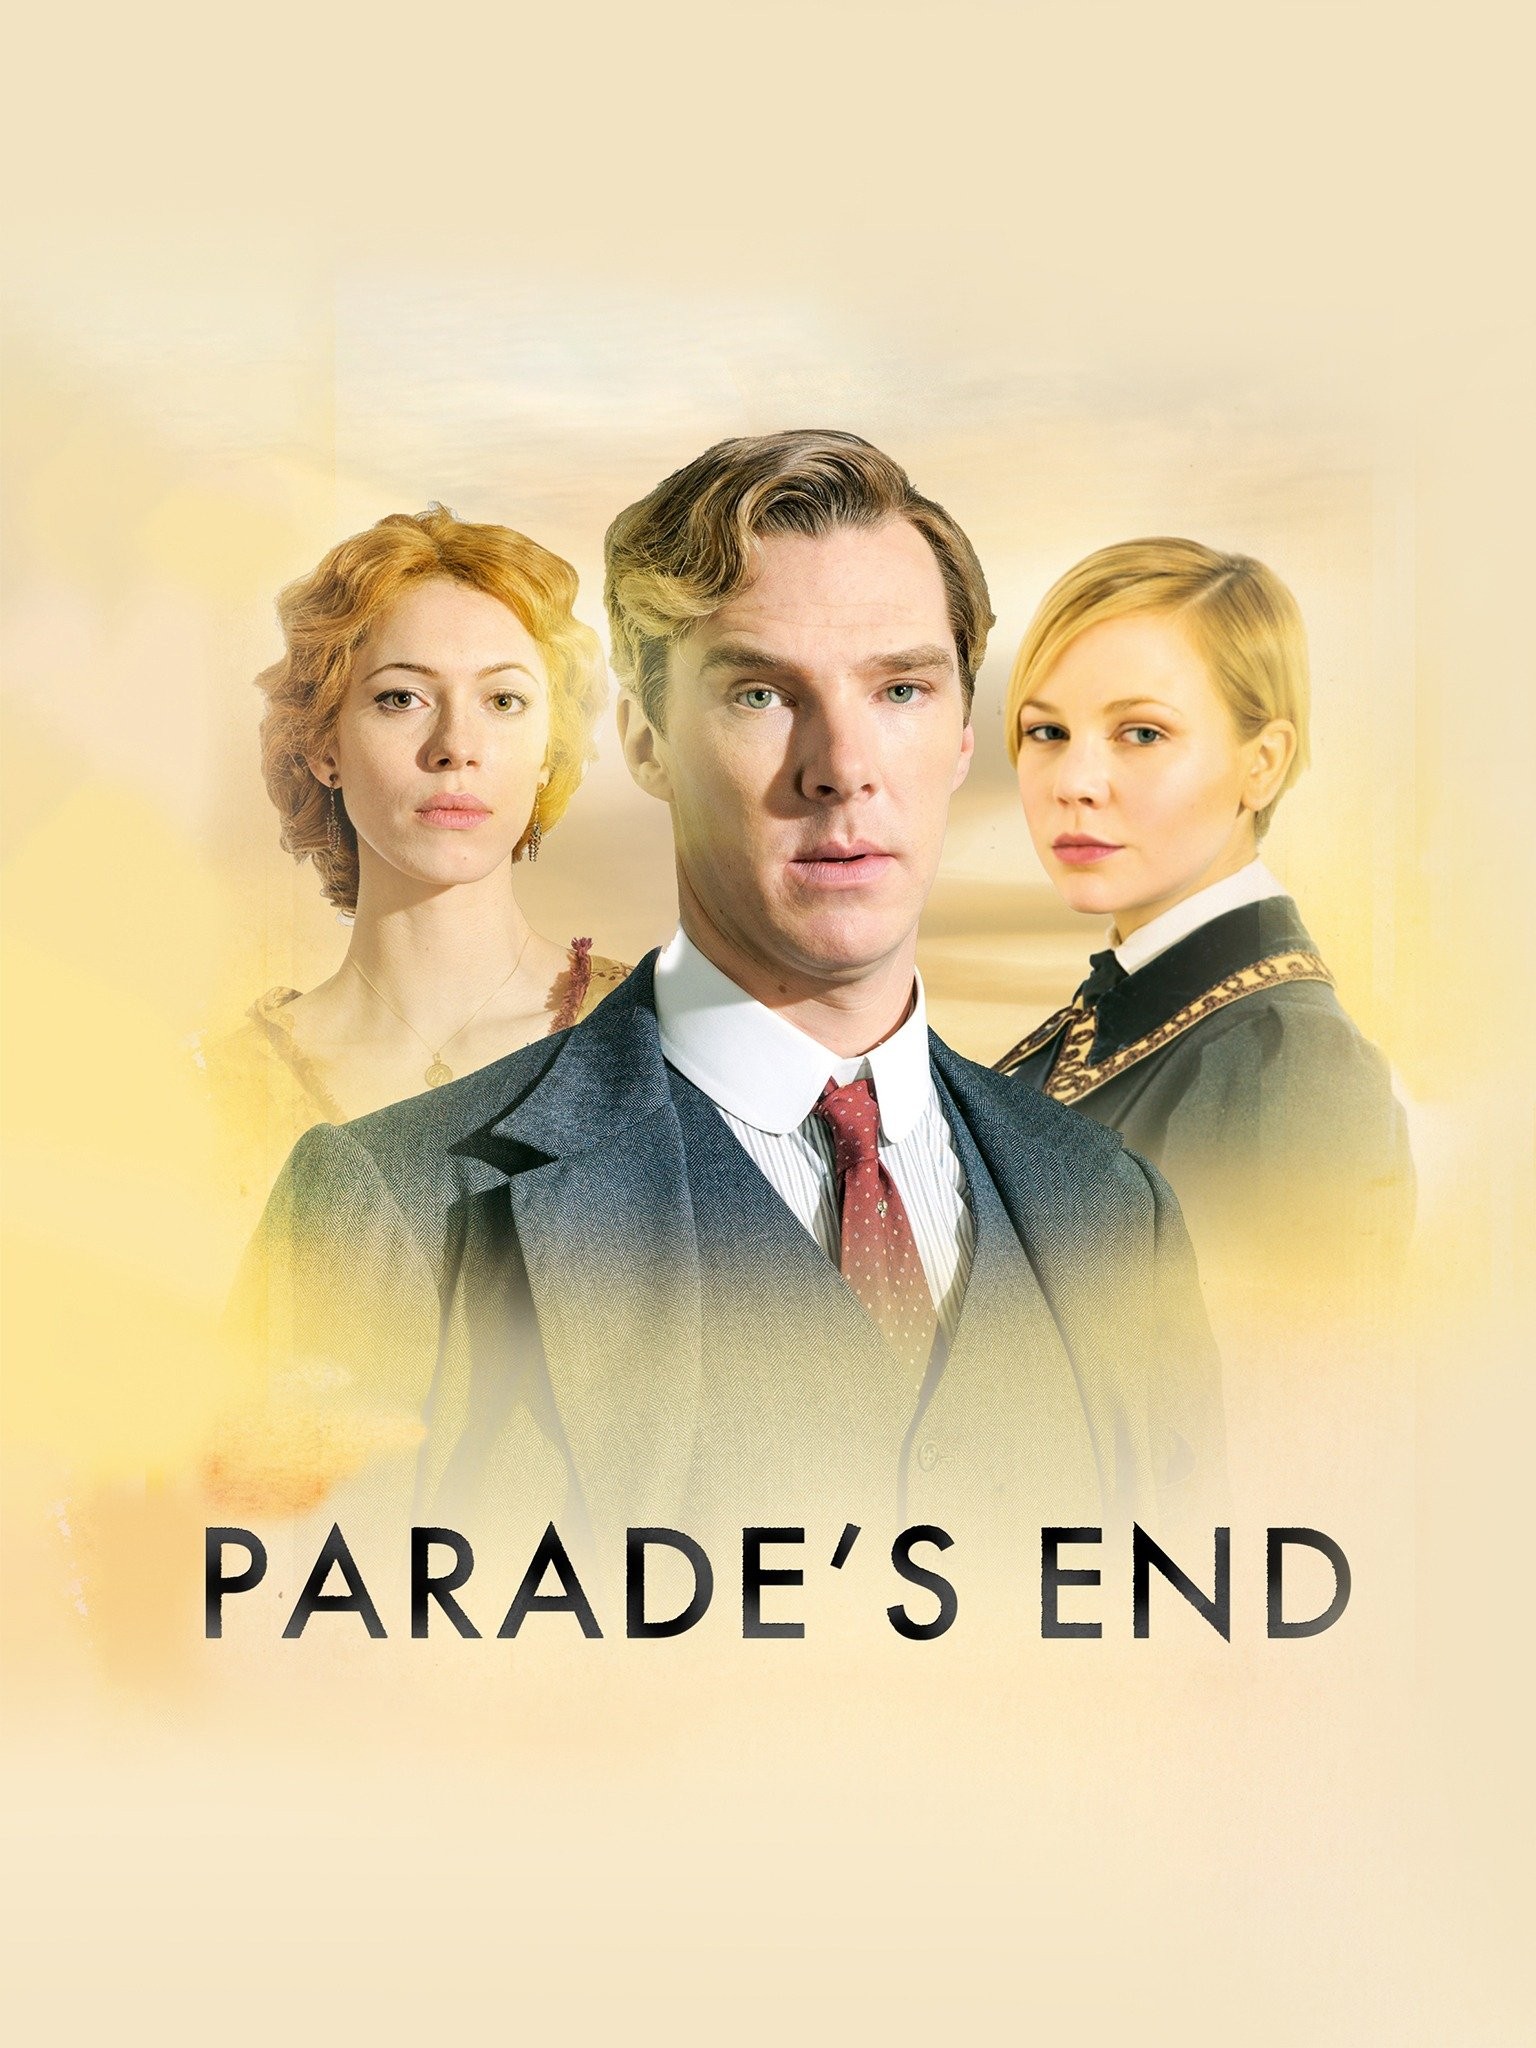 Parade's End: So admirable - www.unidentalce.com.br